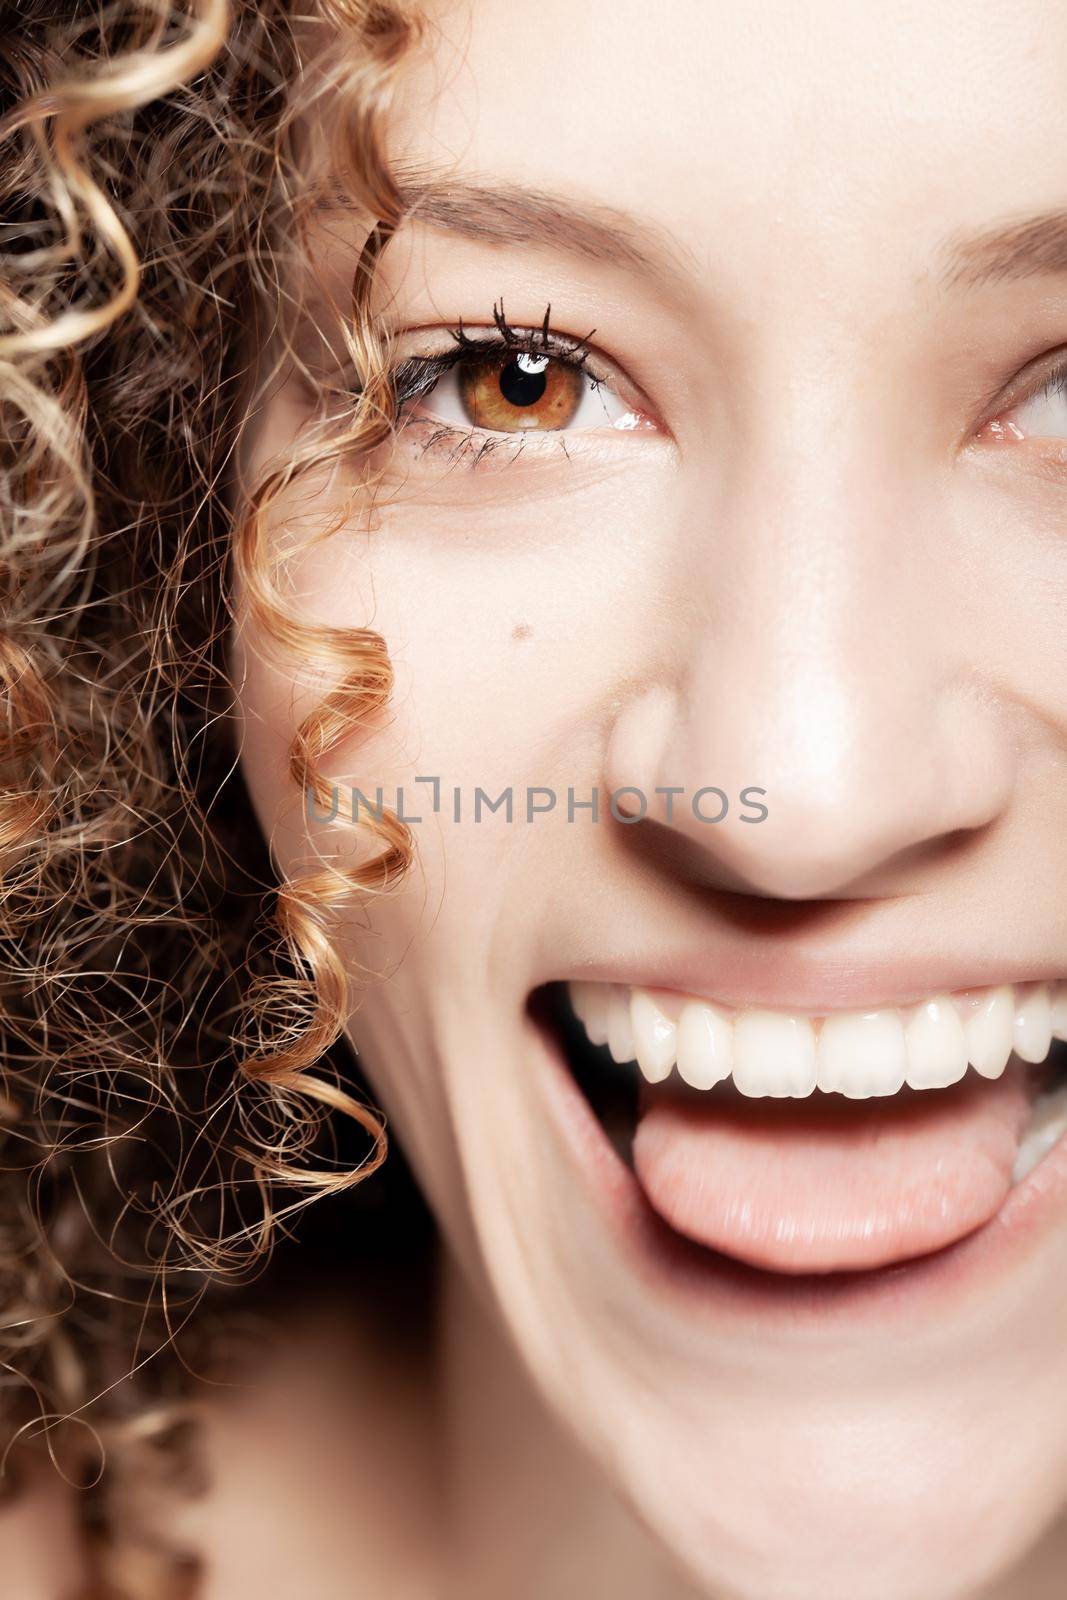 Beautiful brunette girl with long curly hair. Closeup studio portrait. Happy face expression. Tongue out. by kokimk